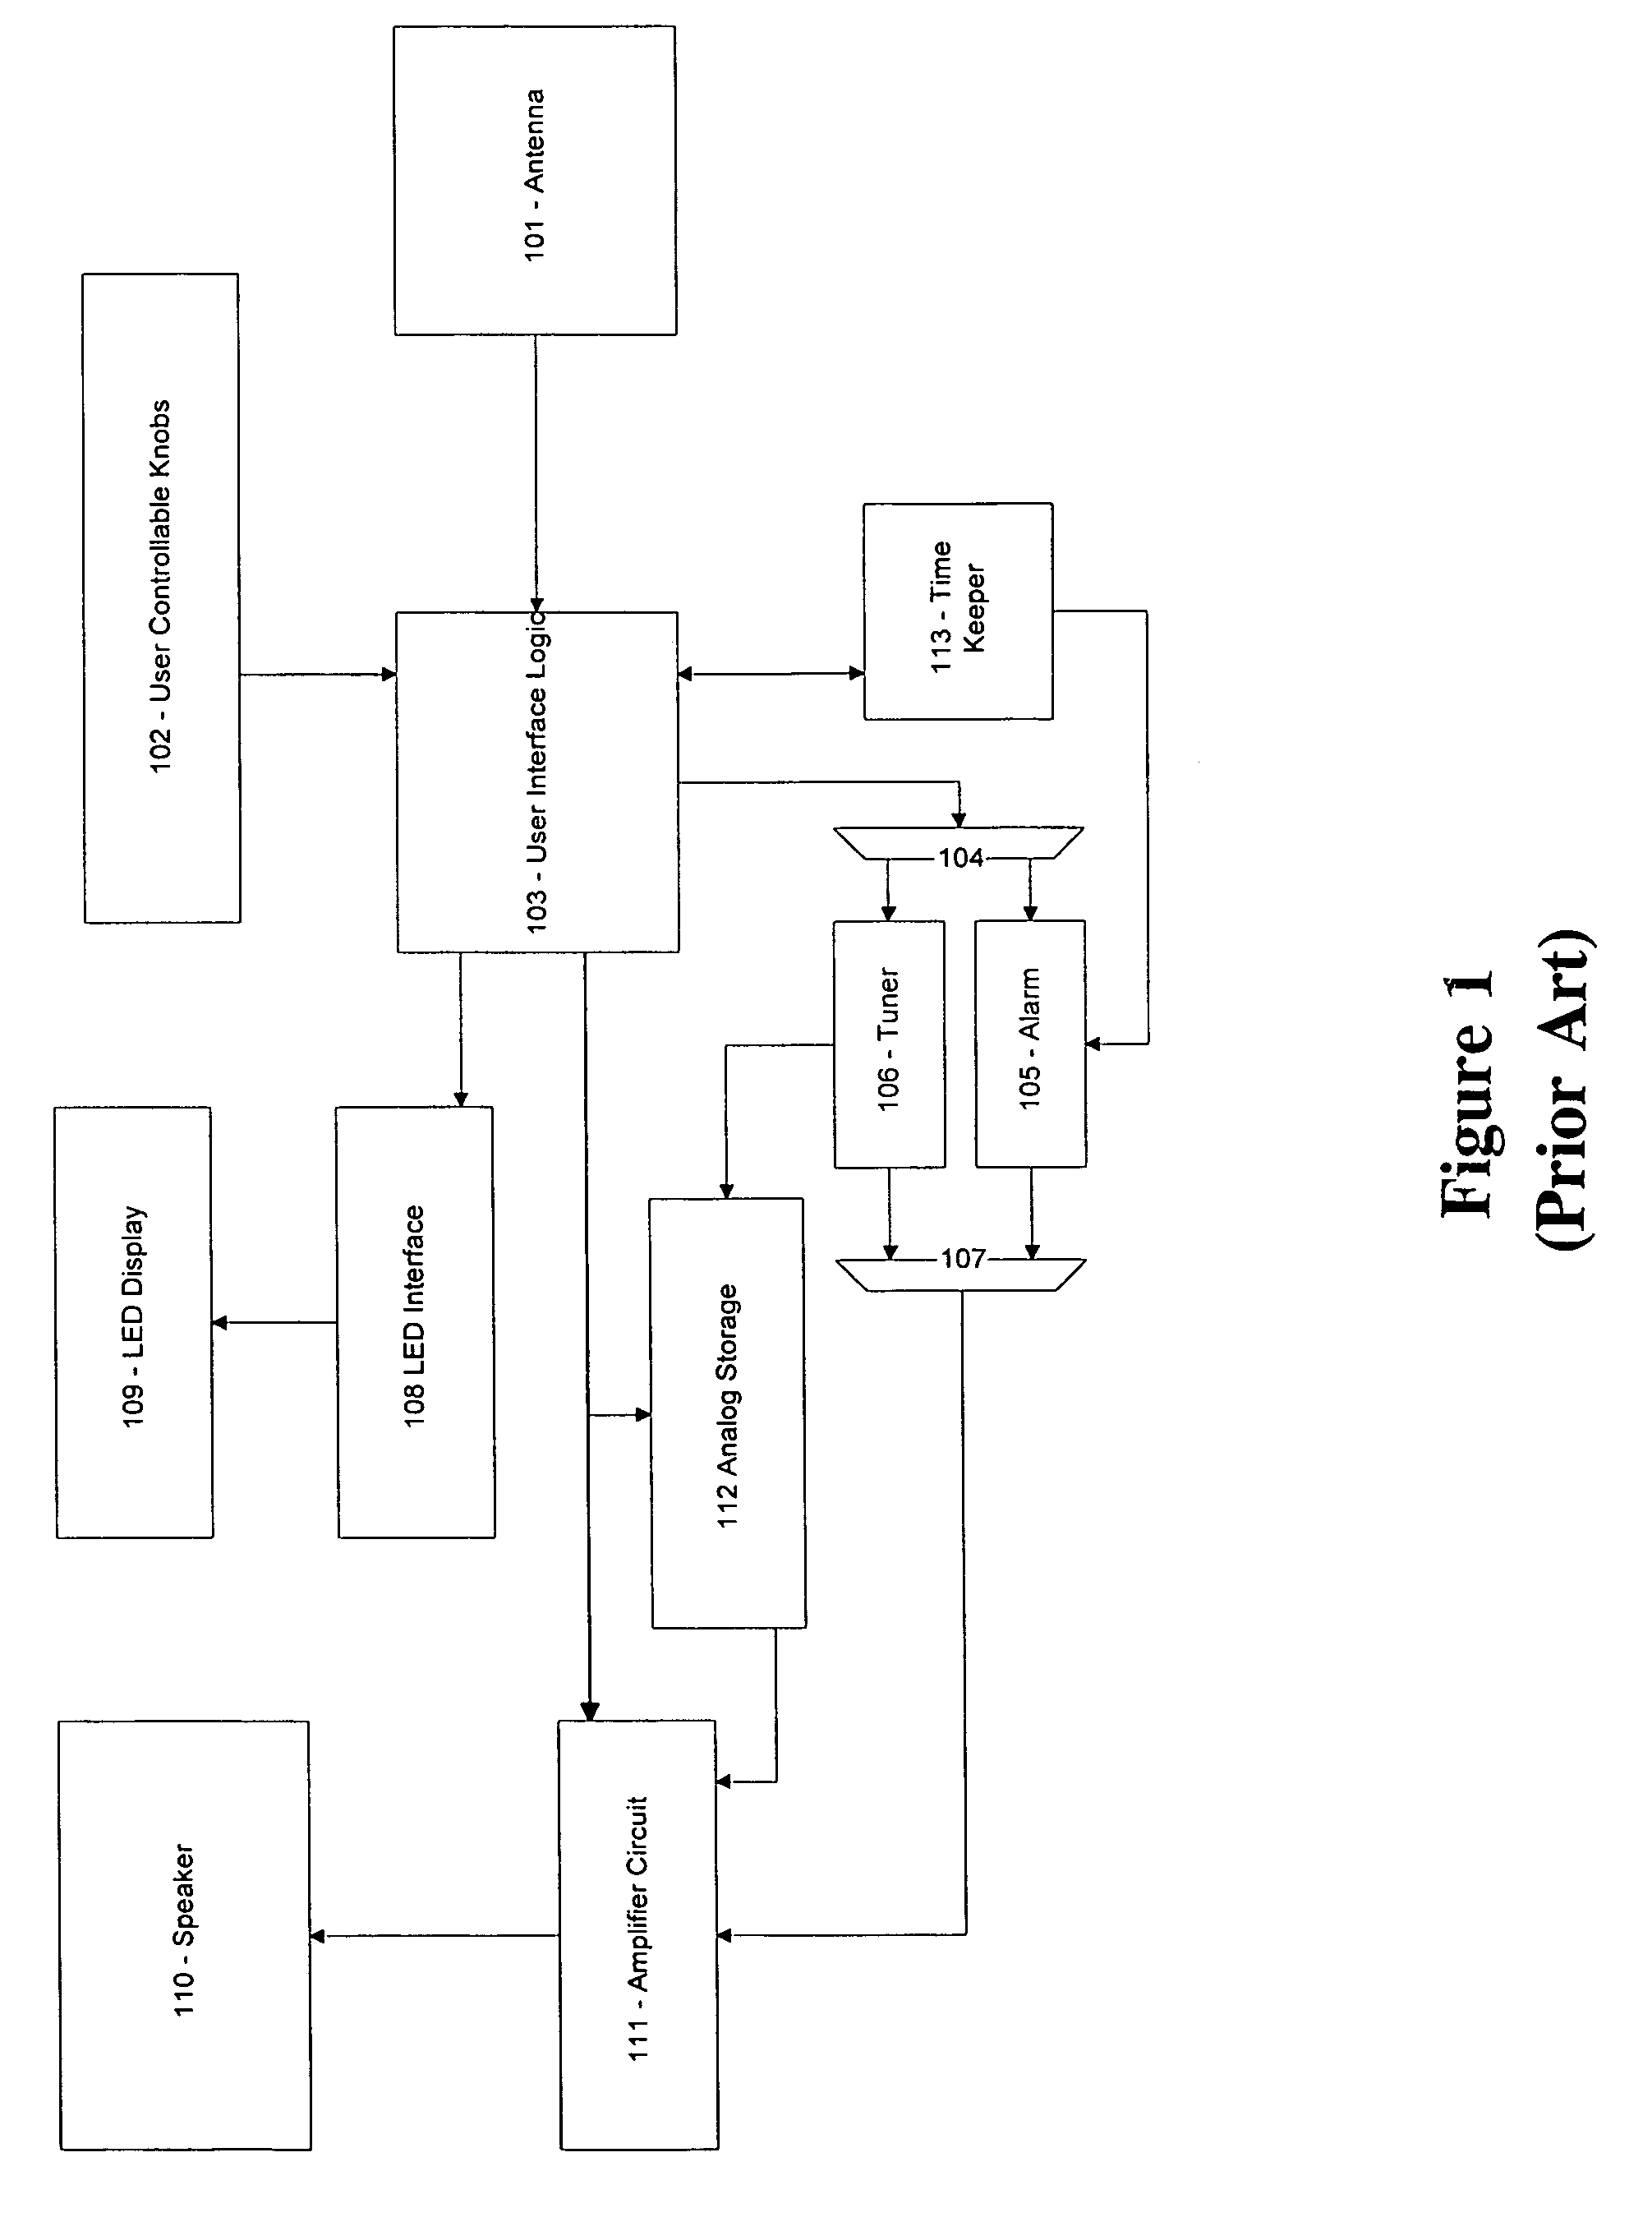 Substantially integrated digital network and broadcast radio method and apparatus